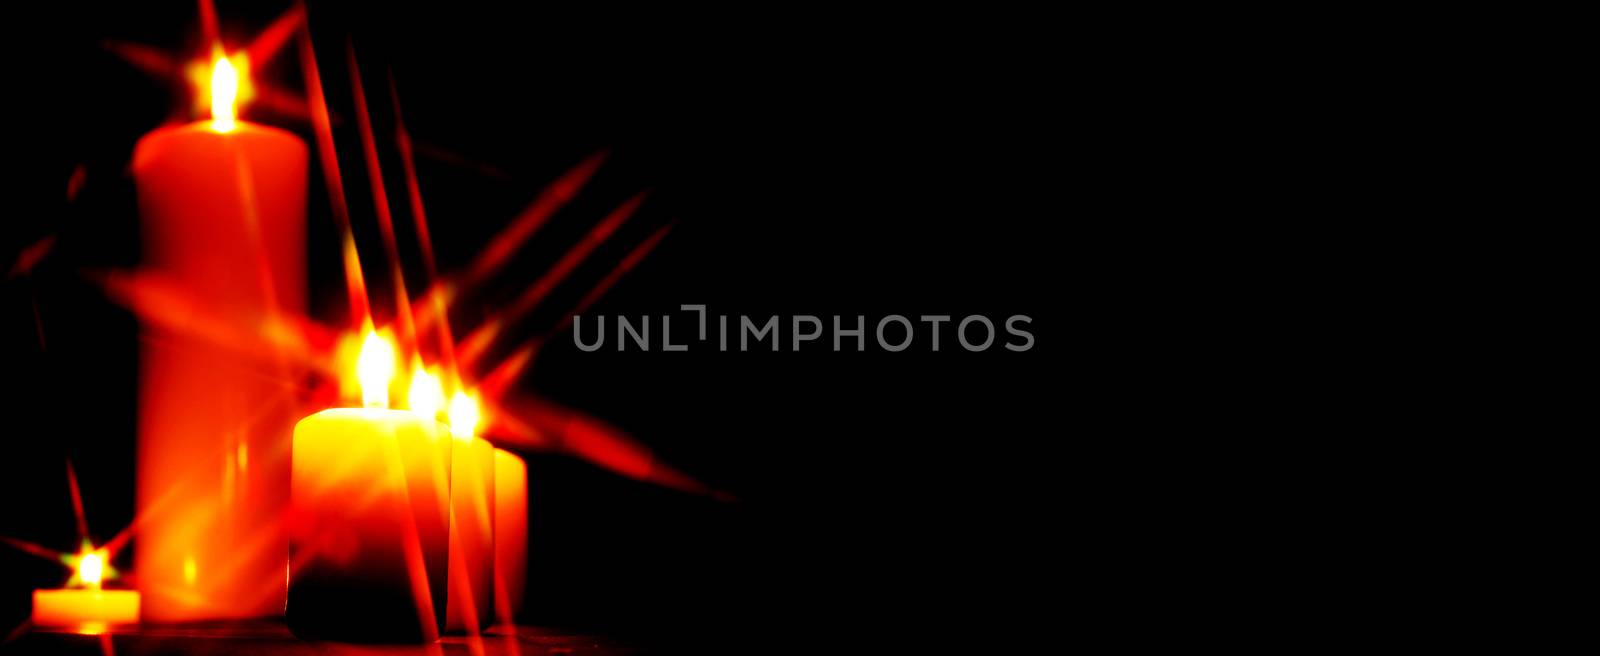 Set of lighting candles in a row on dark background